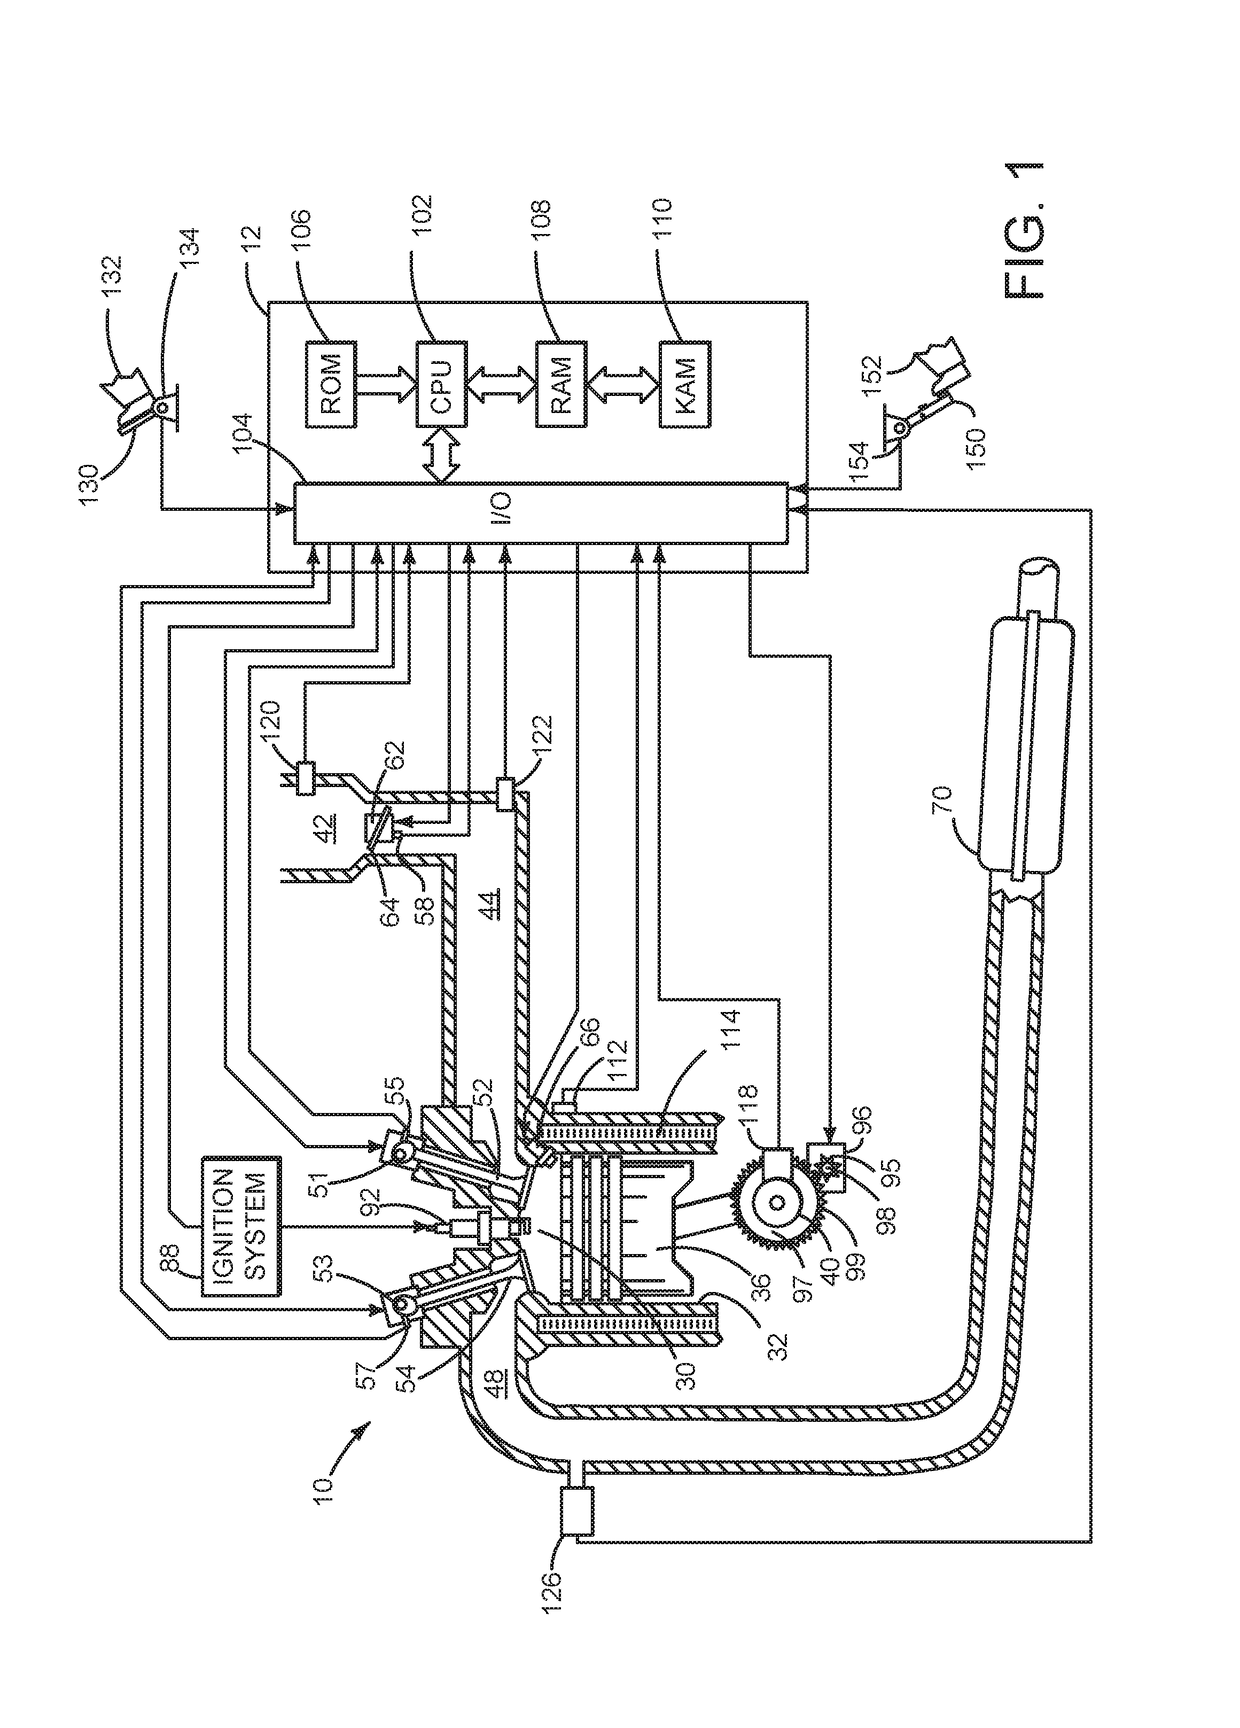 Methods and systems for extending electric idle